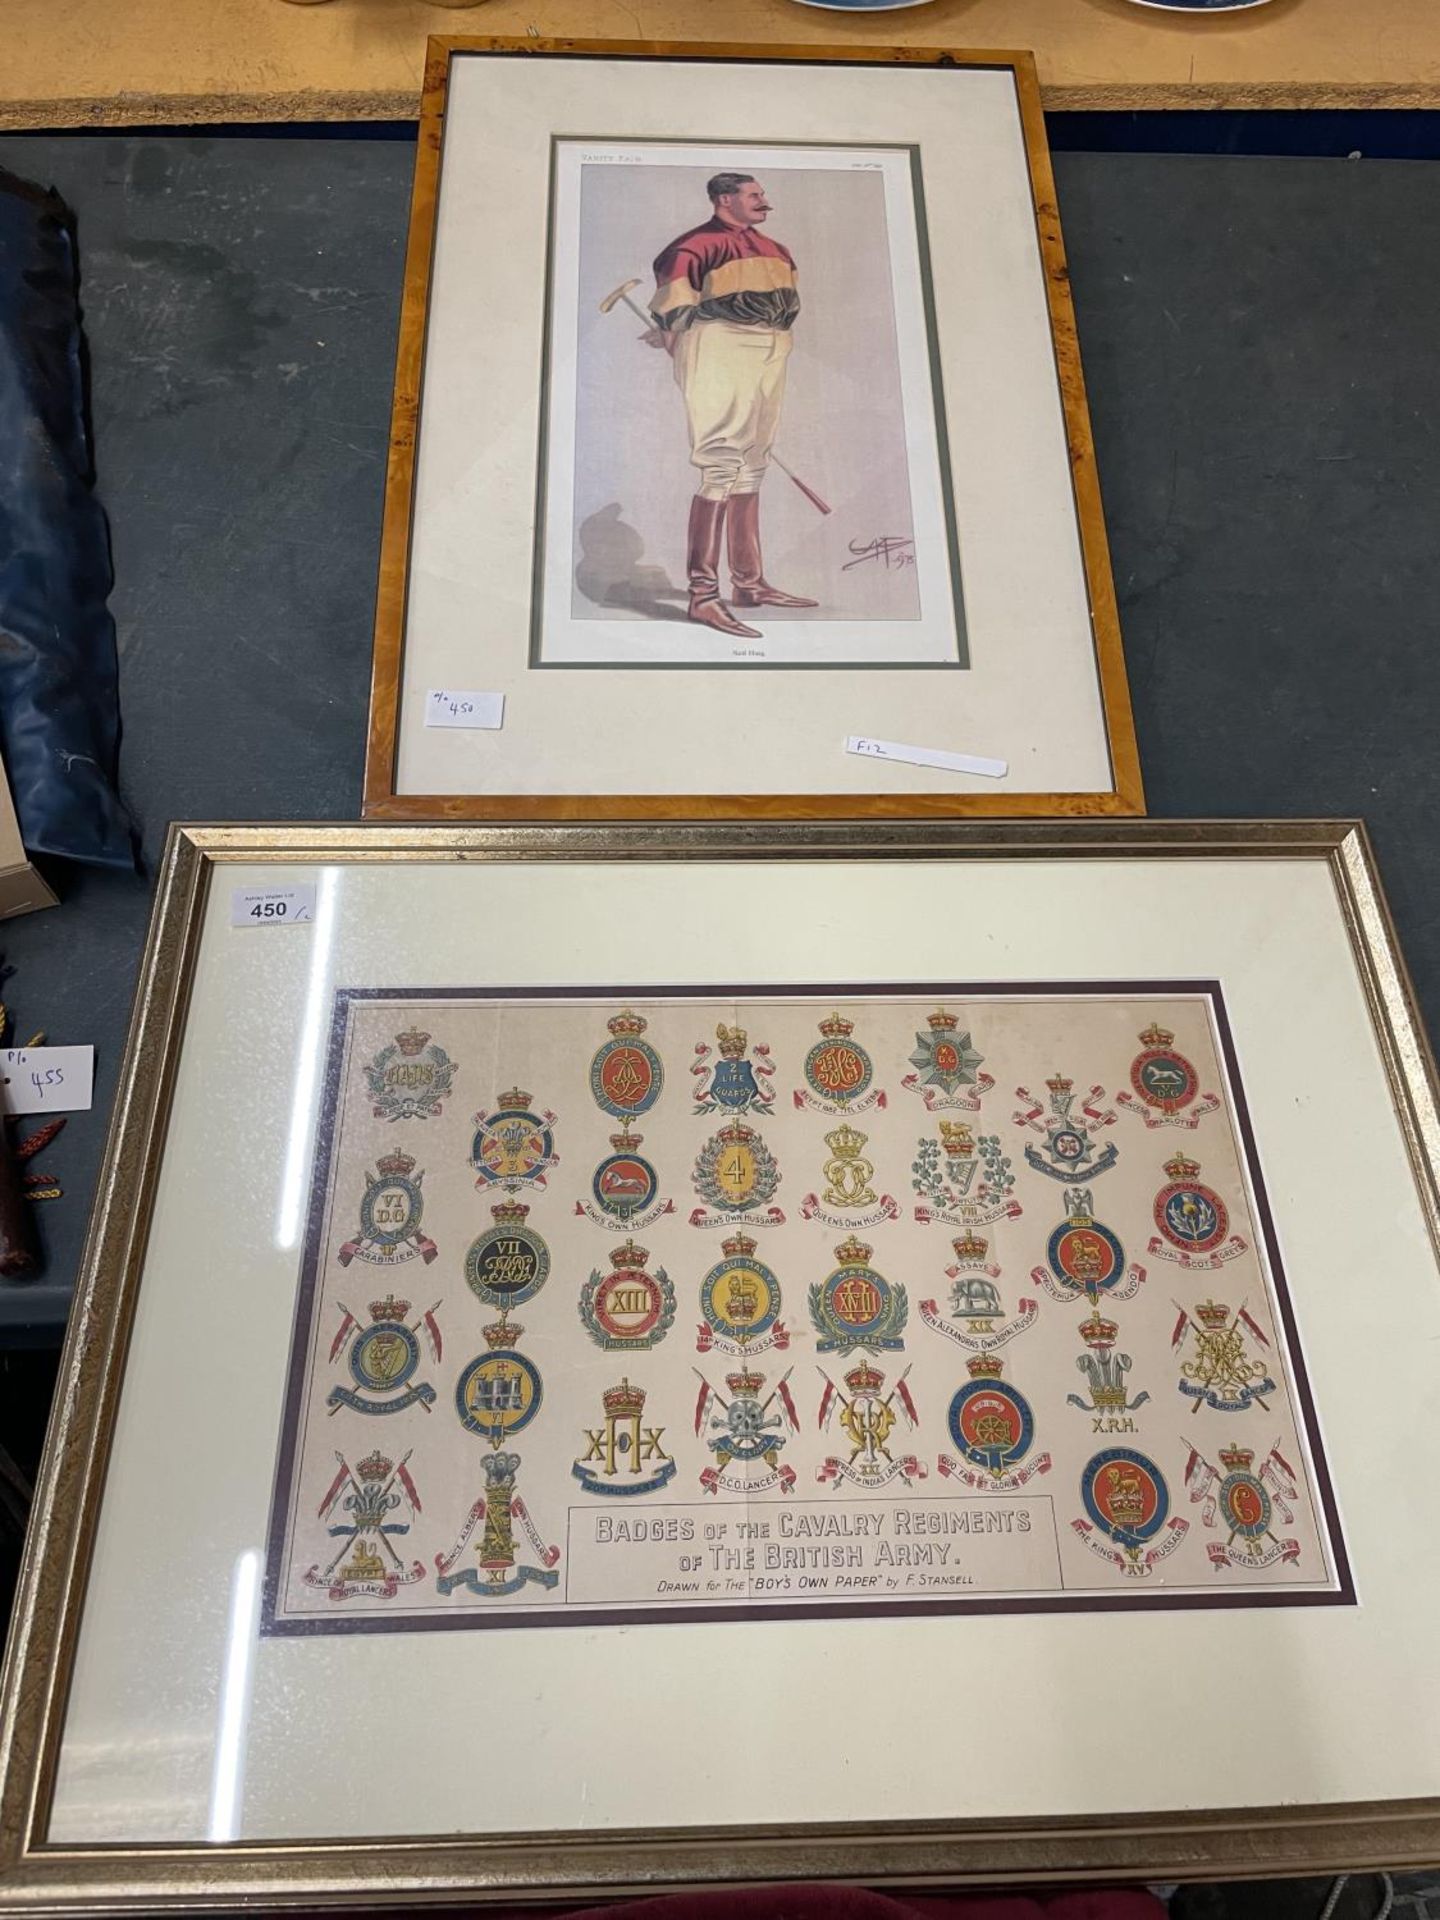 BADGES OF THE CAVALRY REGIMENTS OF THE BRITISH ARMY, 25 X 40CM, FRAMED AND GLAZED, FRAMED PRINT OF